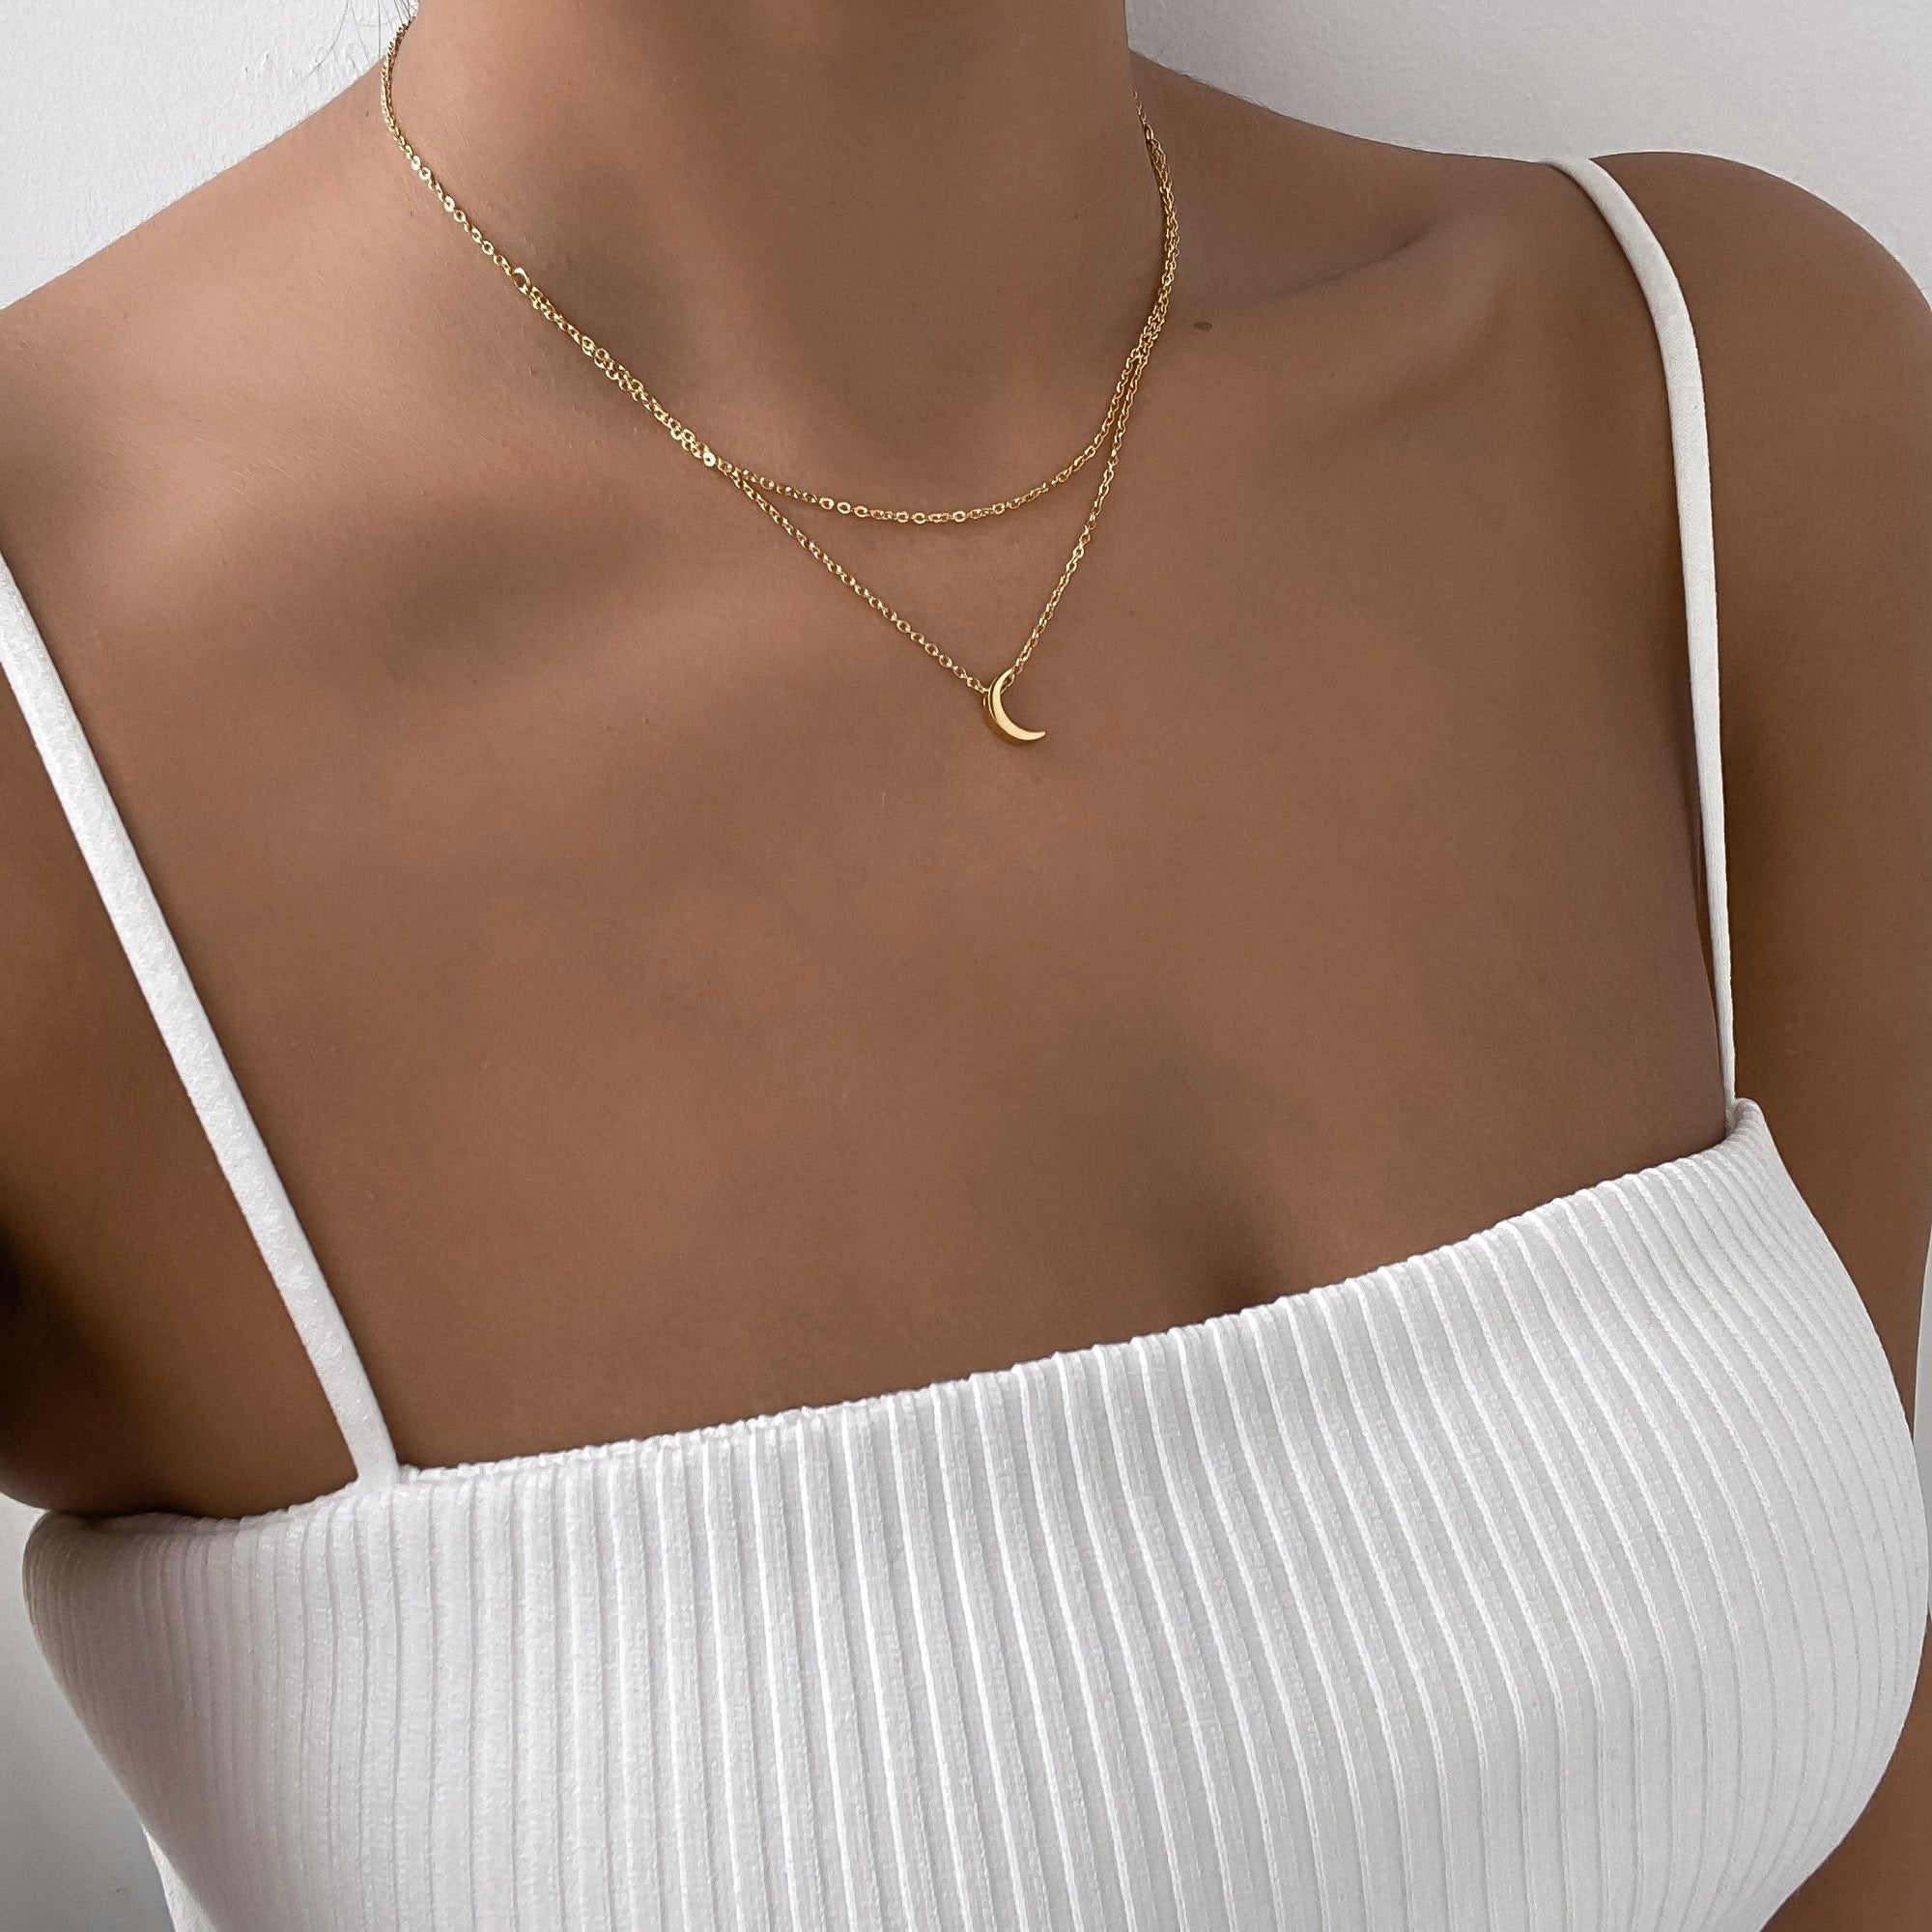 Celine Layered Moon Necklace